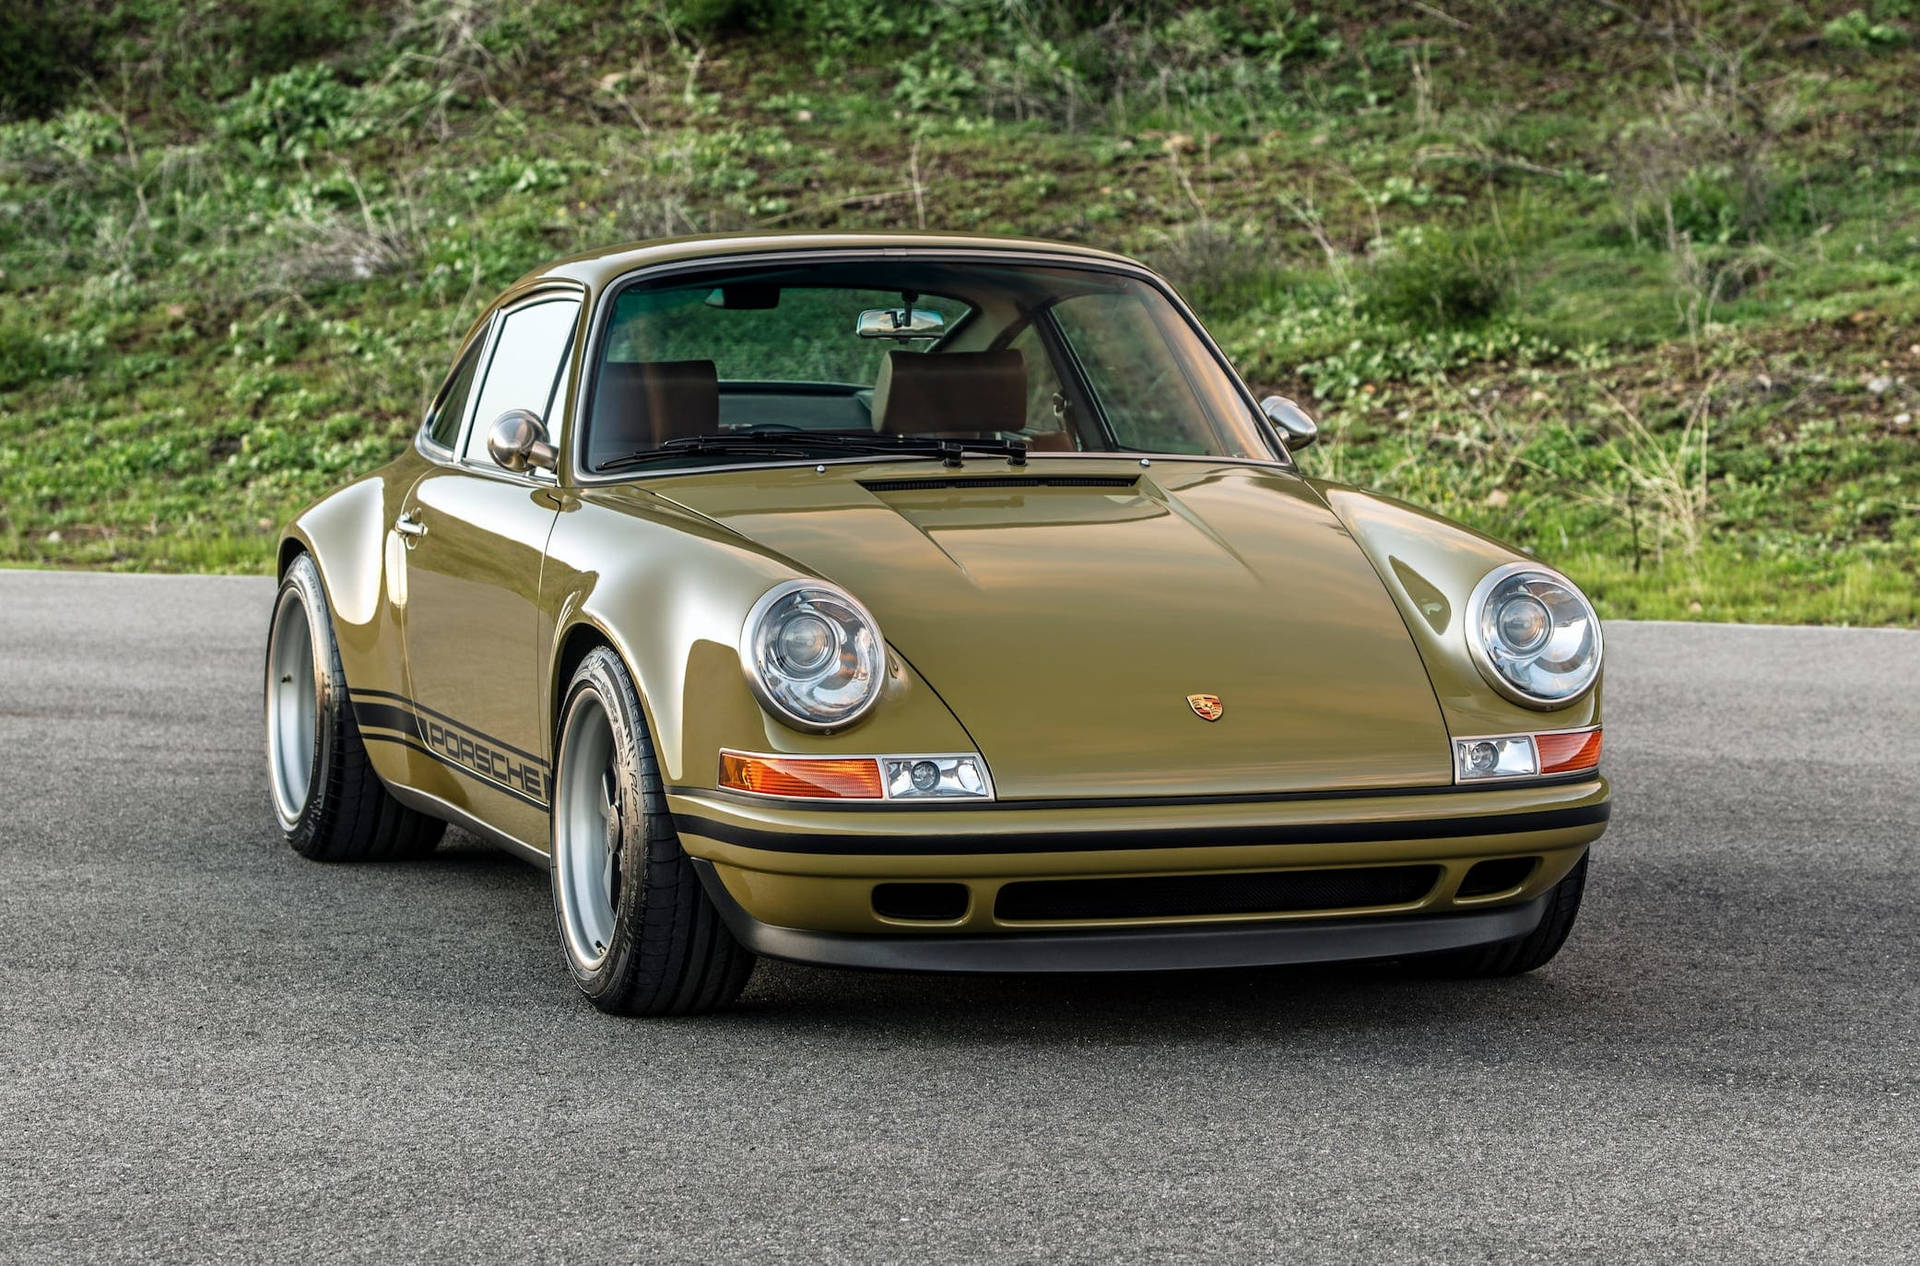 The Exquisite Olive-brown Singer Porsche Showcased In Its Full Glory